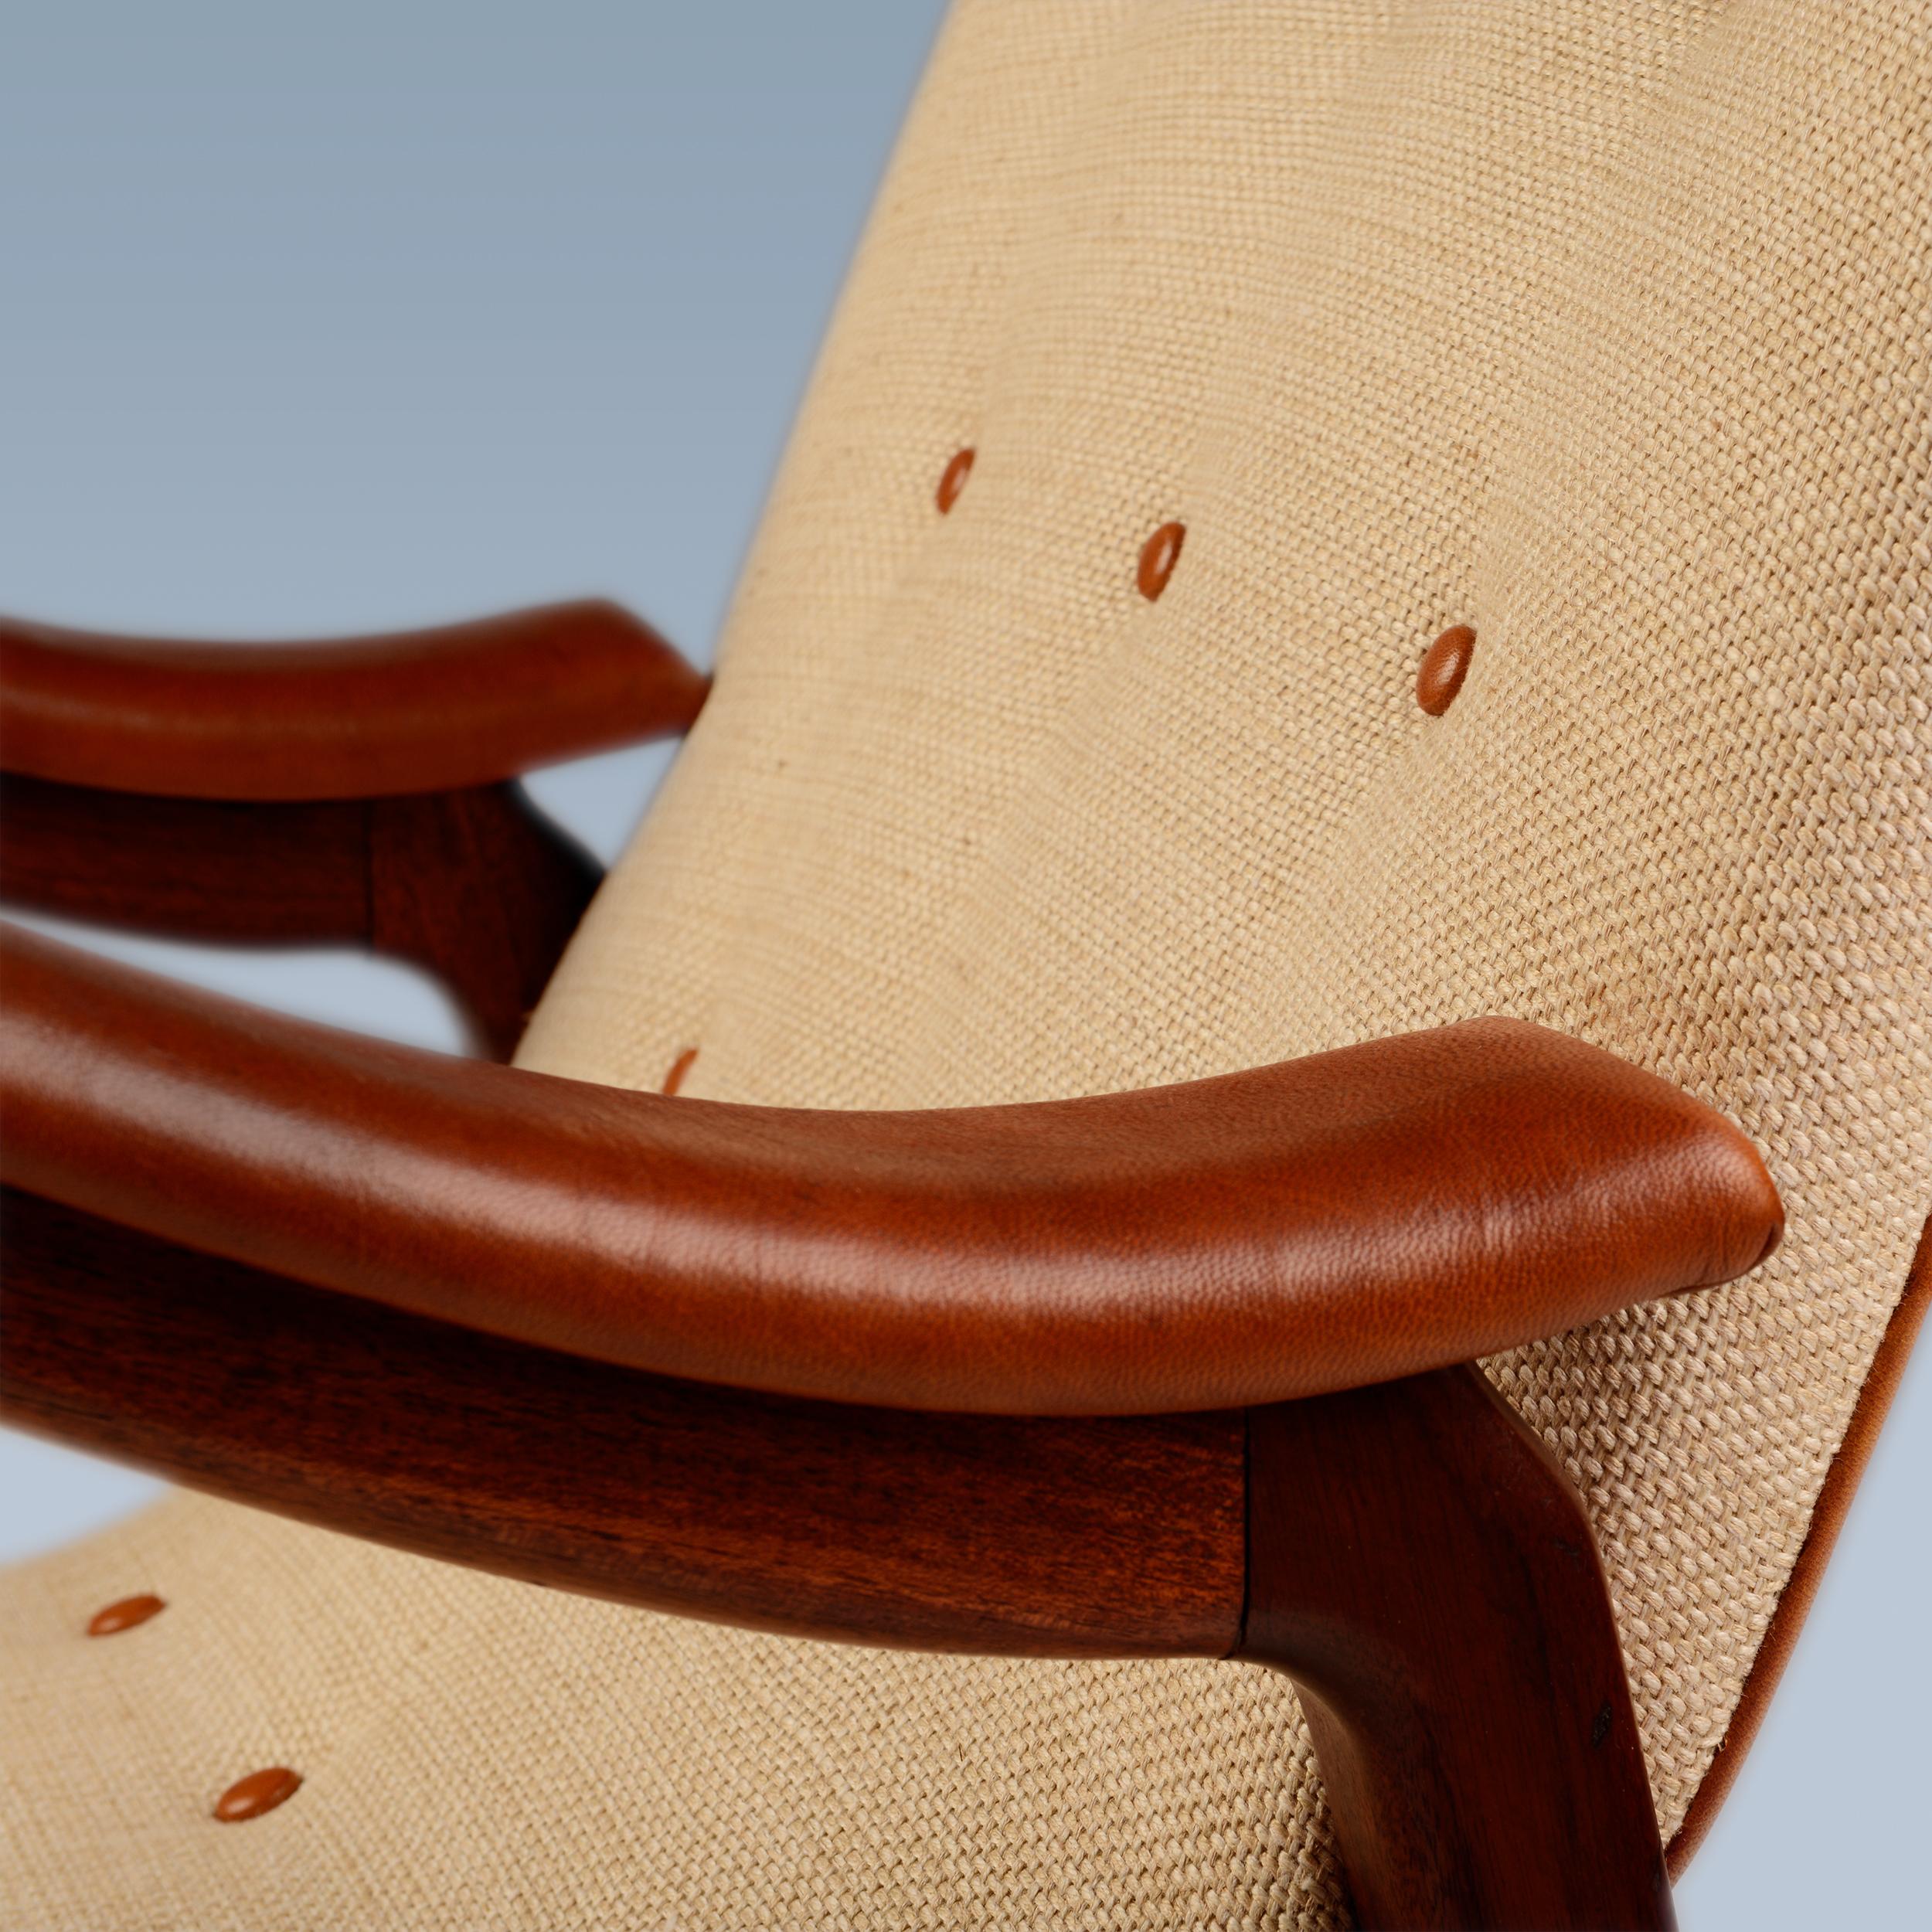 Teak chair with curvy seat upholstered with light fabric and leather details For Sale 4